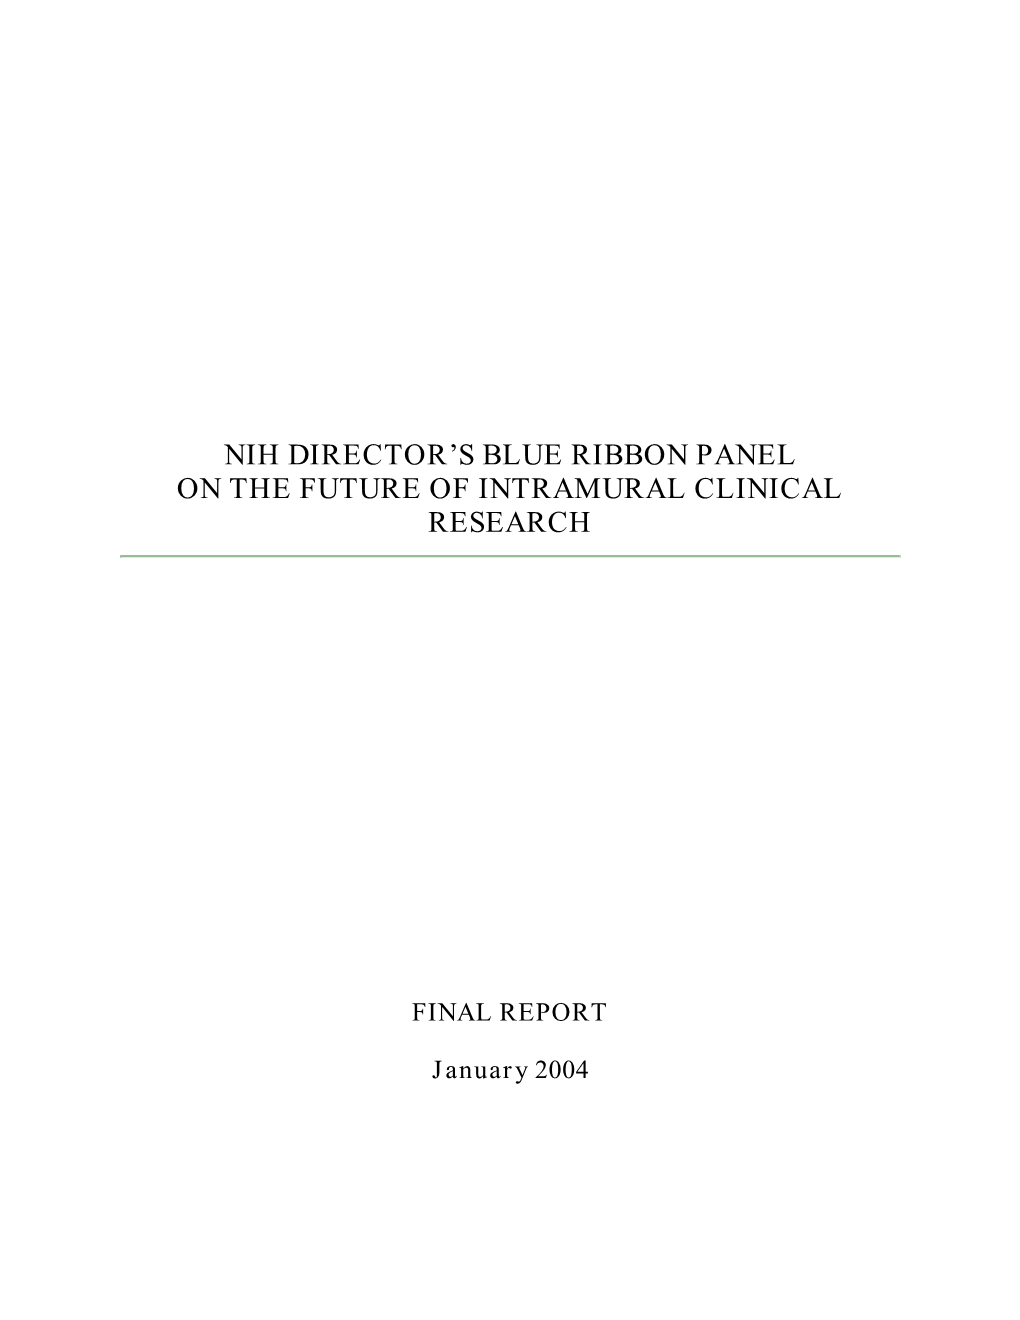 NIH Director's Blue Ribbon Panel on the Future of Intramural Clinical